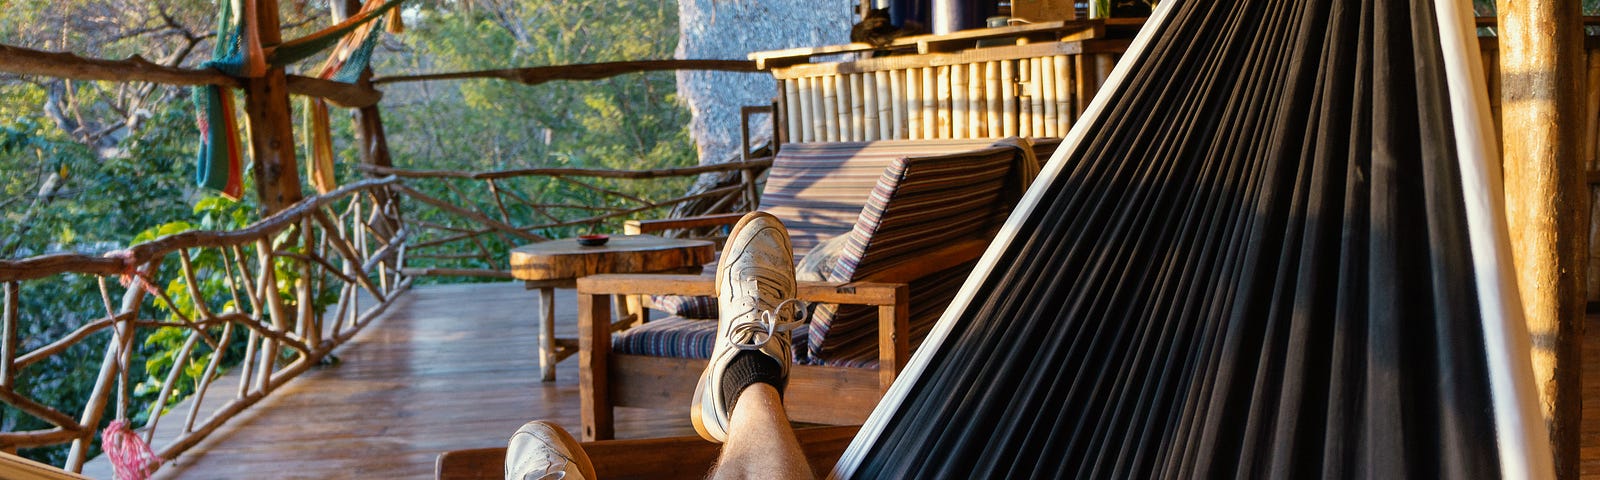 A person relaxing on a hammock while admiring the scenery.